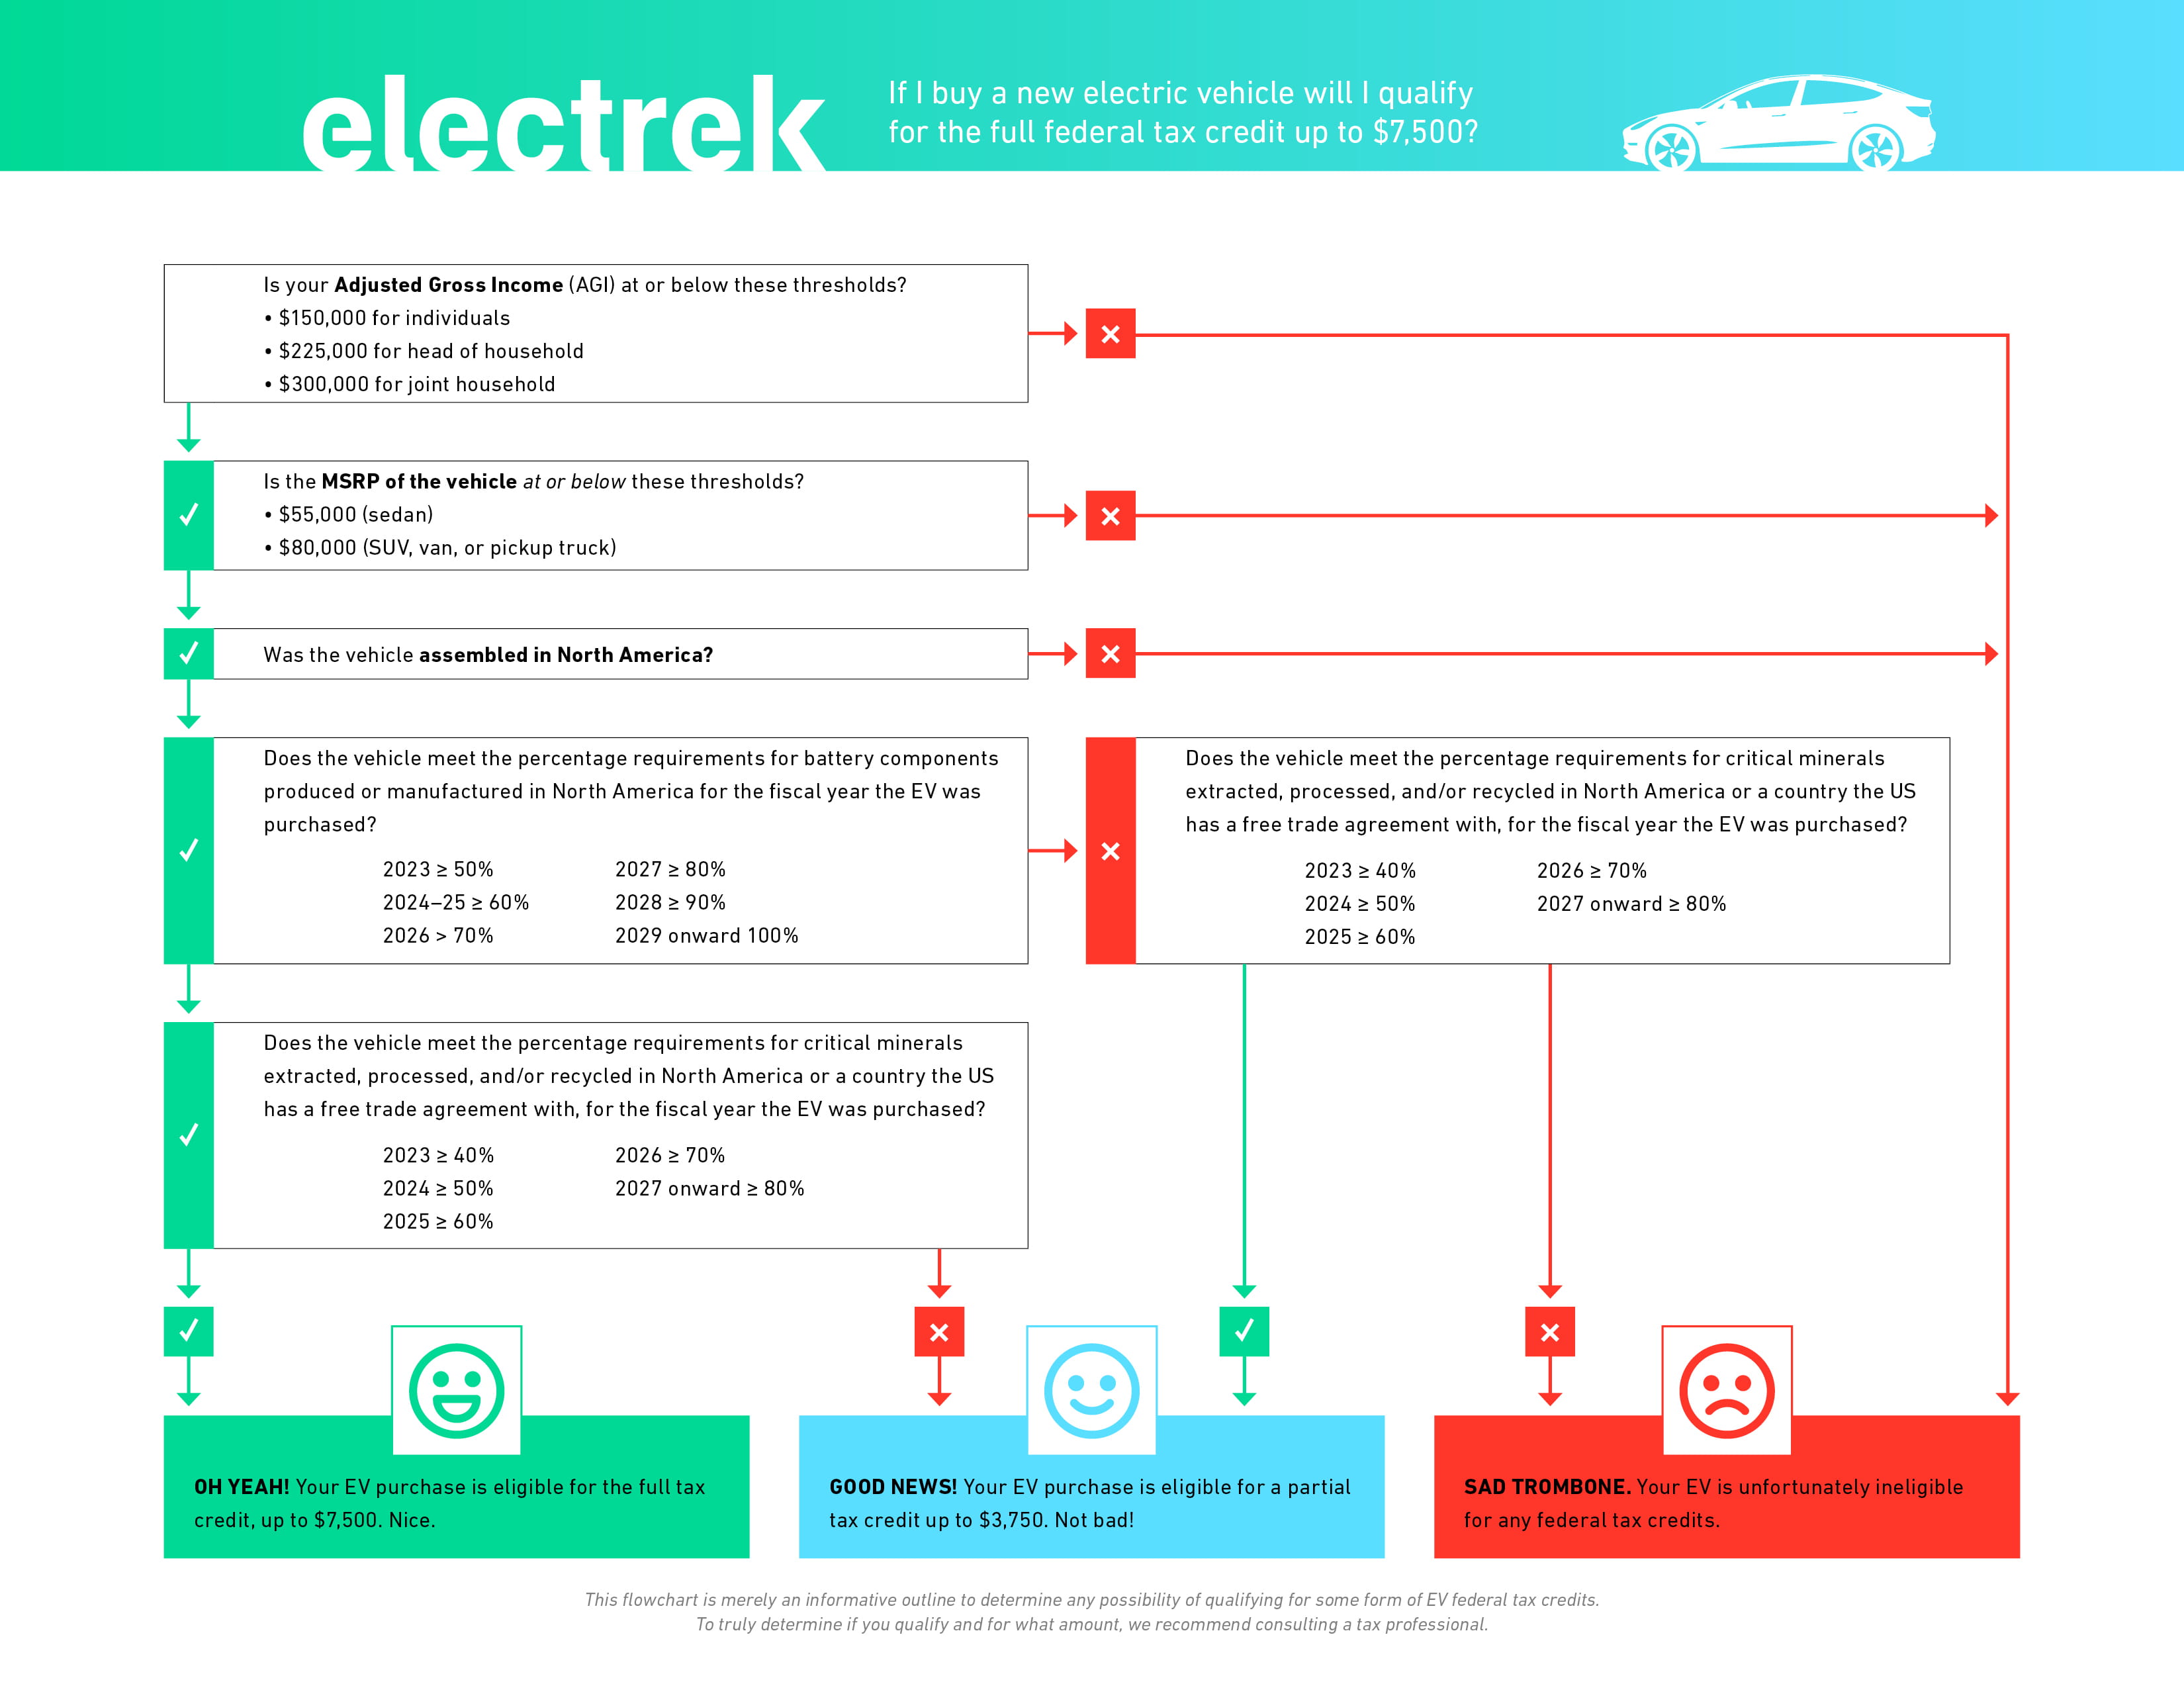 Everything you need to know about the IRS's new EV tax credit guidance